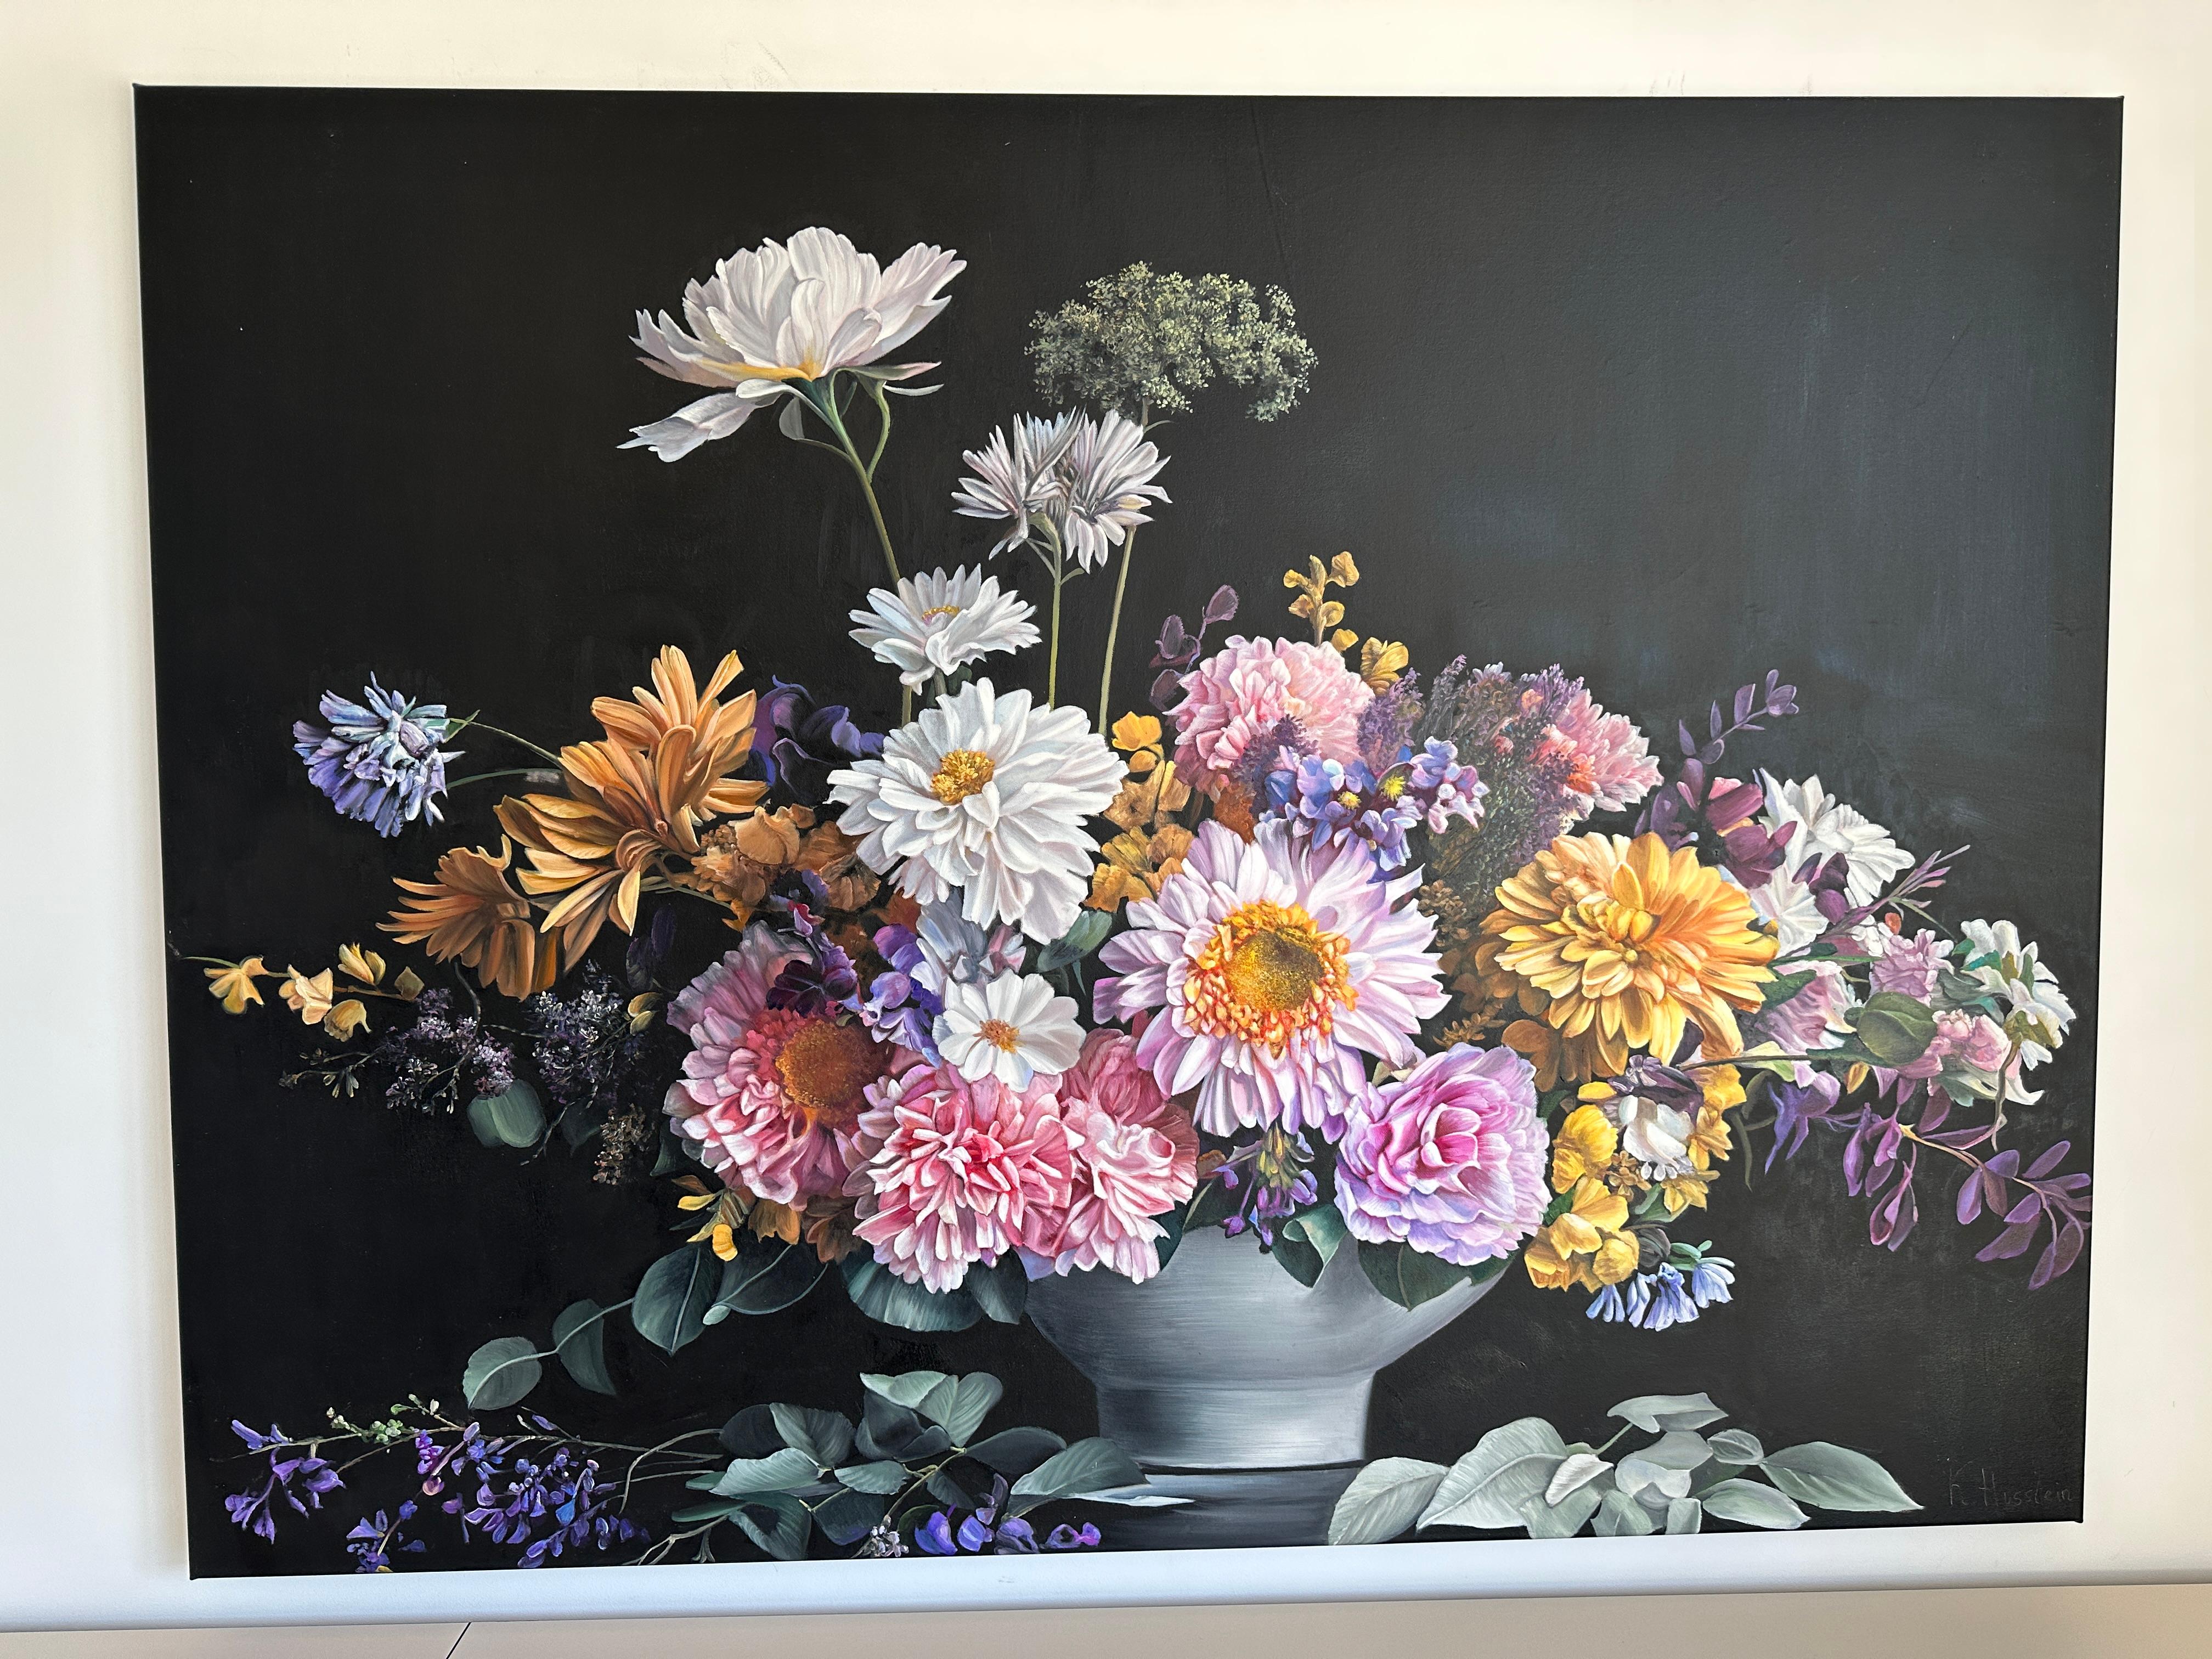 The essential is invisible to the Eyes

This is a beautiful oil painting of an array of flowers in a vase in front of a dark background.
Reminding us of old master paintings, this is a brand new painting full elegance and timeless elegance.
The